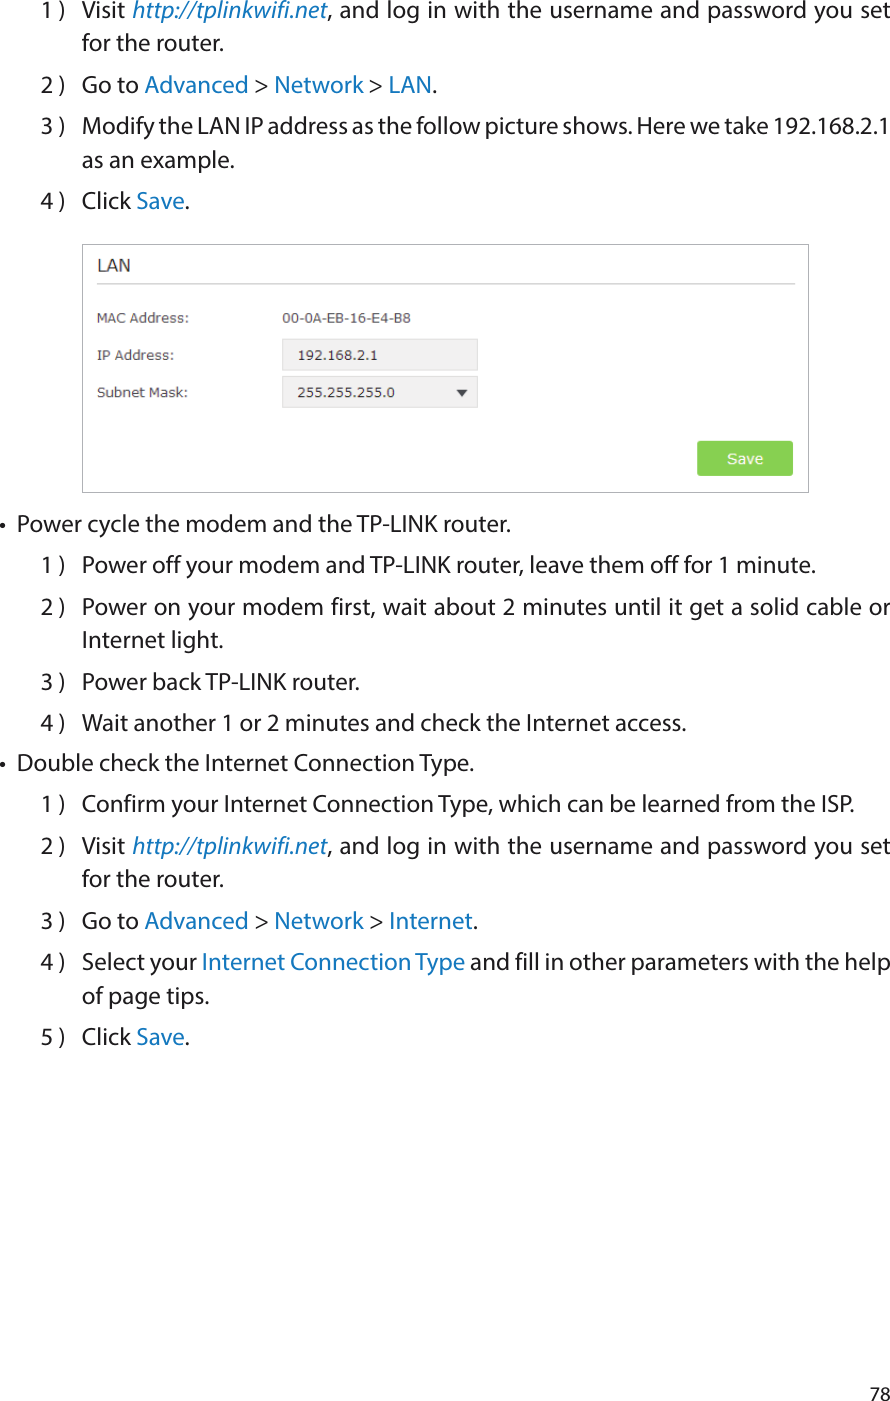 781 )  Visit http://tplinkwifi.net, and log in with the username and password you set for the router.2 )  Go to Advanced &gt; Network &gt; LAN.3 )  Modify the LAN IP address as the follow picture shows. Here we take 192.168.2.1 as an example.4 )  Click Save.•  Power cycle the modem and the TP-LINK router.1 )  Power off your modem and TP-LINK router, leave them off for 1 minute.2 )  Power on your modem first, wait about 2 minutes until it get a solid cable or Internet light.3 )  Power back TP-LINK router.4 )  Wait another 1 or 2 minutes and check the Internet access.•  Double check the Internet Connection Type.1 )  Confirm your Internet Connection Type, which can be learned from the ISP.2 )  Visit http://tplinkwifi.net, and log in with the username and password you set for the router.3 )  Go to Advanced &gt; Network &gt; Internet.4 )  Select your Internet Connection Type and fill in other parameters with the help of page tips.5 )  Click Save.